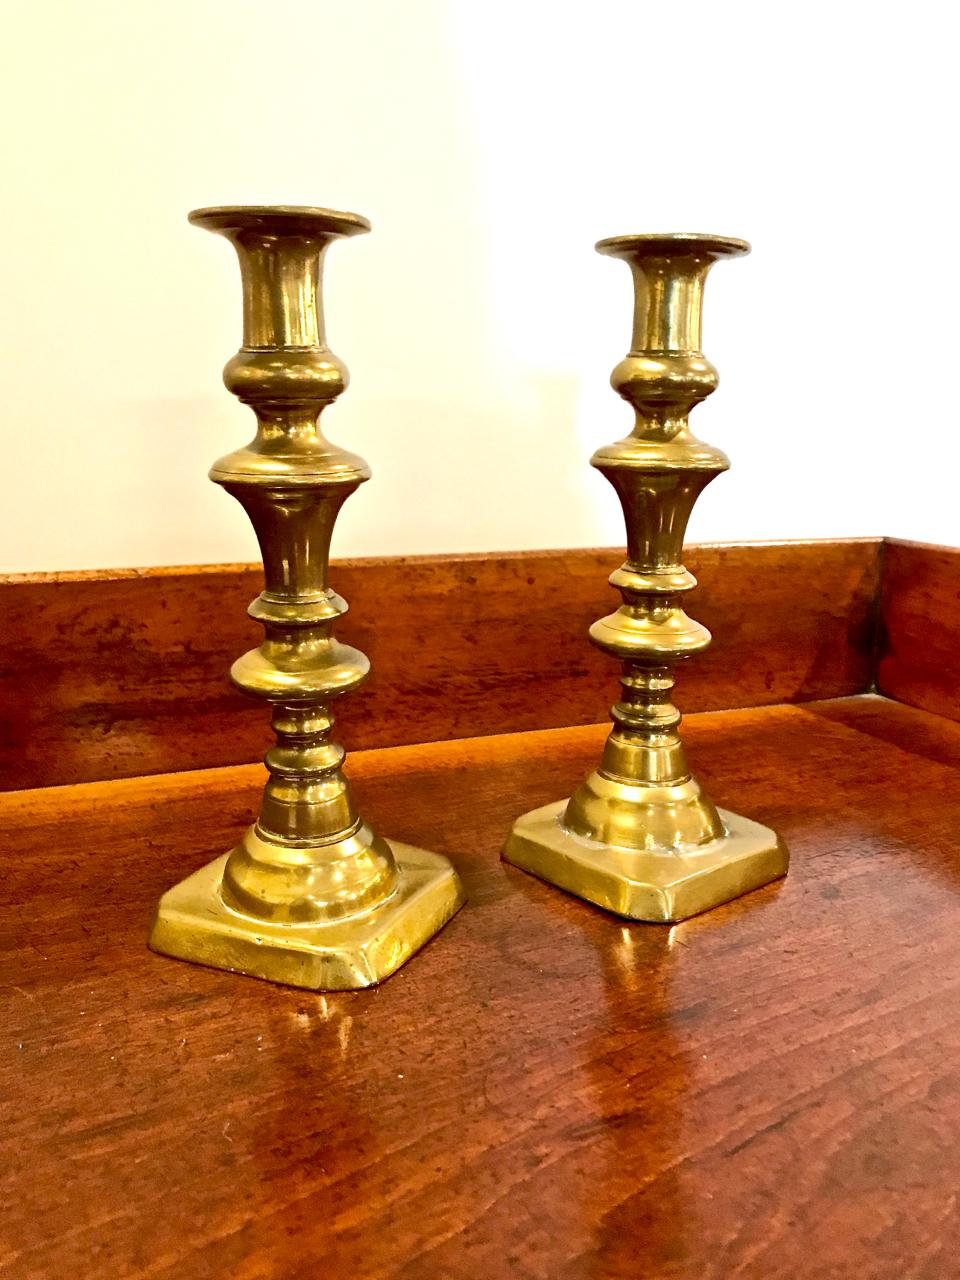 This is the second of two pairs of English Victorian brass Push-Up candlesticks. These sticks are in overall very good condition having acquired a warm natural patina and retaining their original iron push-ups. The bases are a bit uneven; the sticks